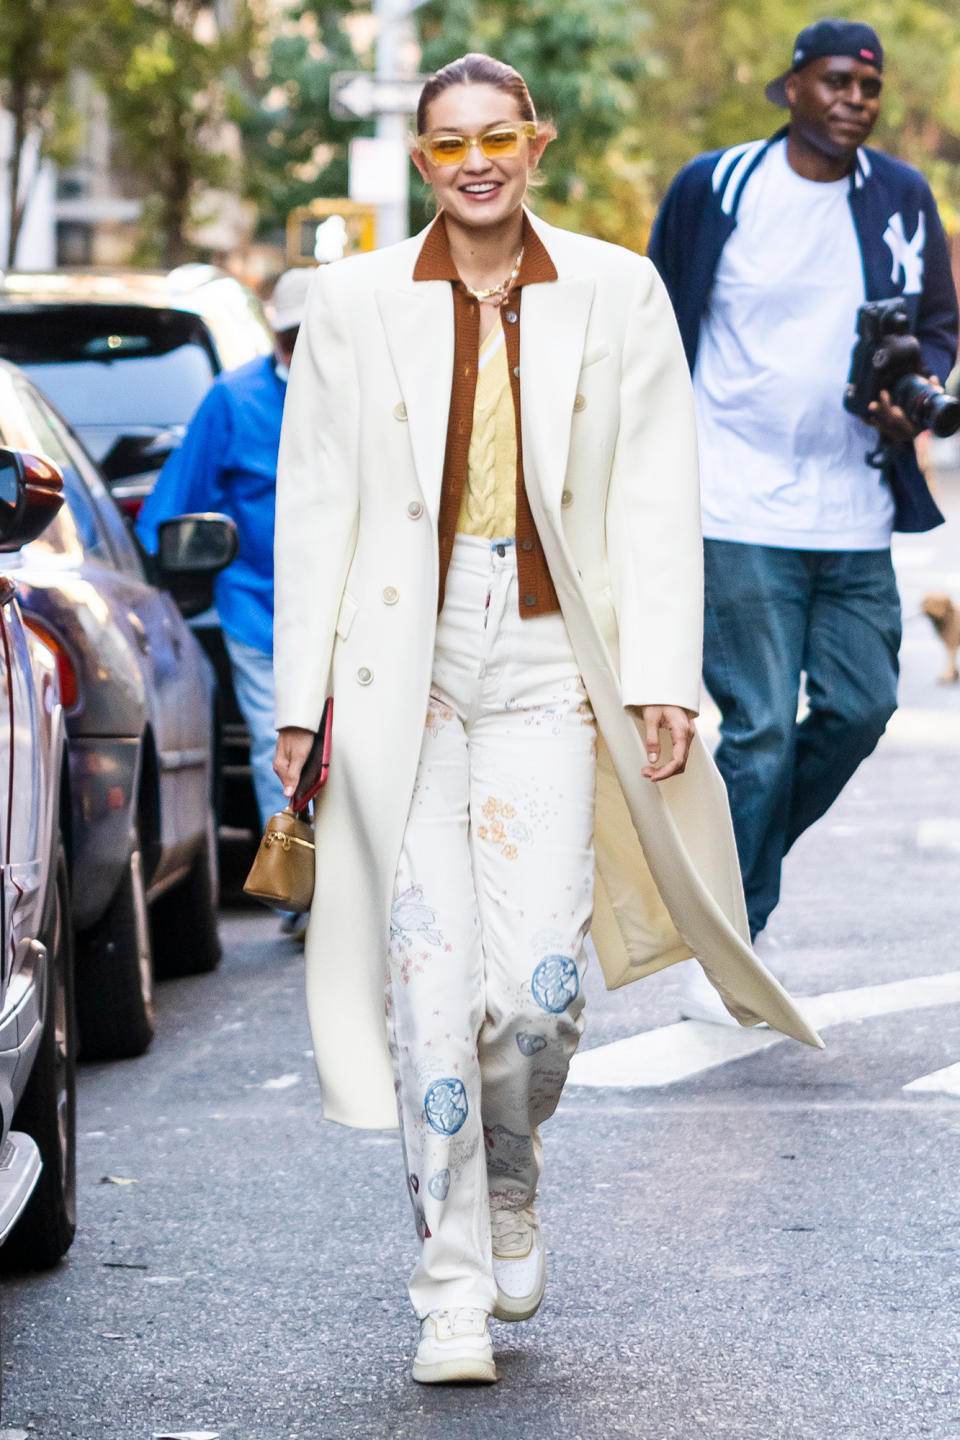 <p>Gigi Hadid sports a long white coat with a stylish pair of yellow sunglasses while out in Soho on Oct. 11 in N.Y.C. </p>